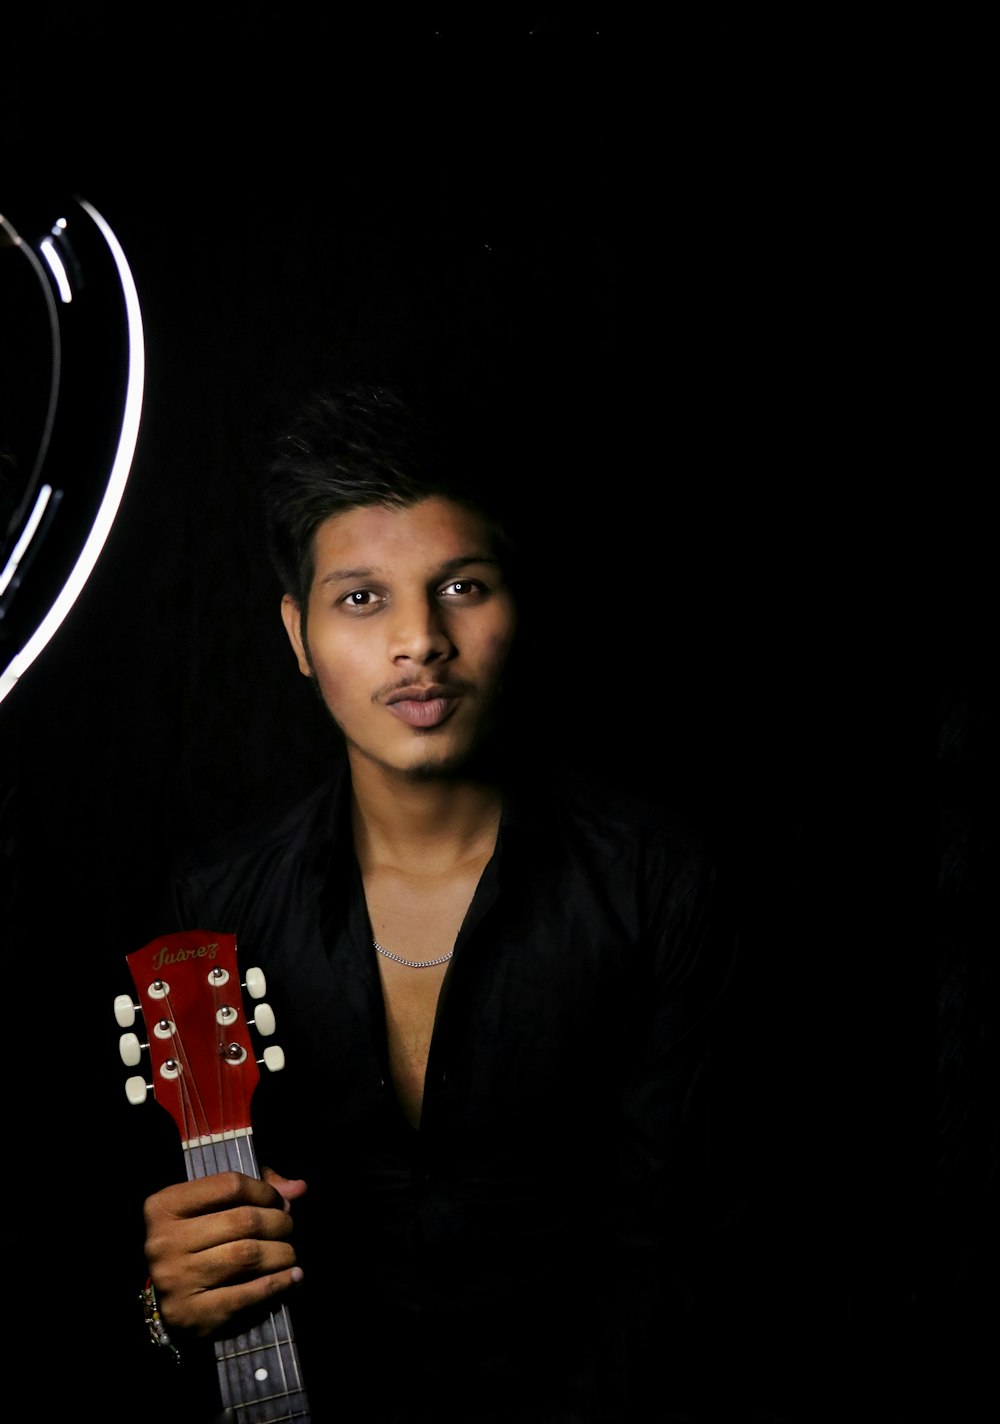 a man holding a red guitar in front of a black background